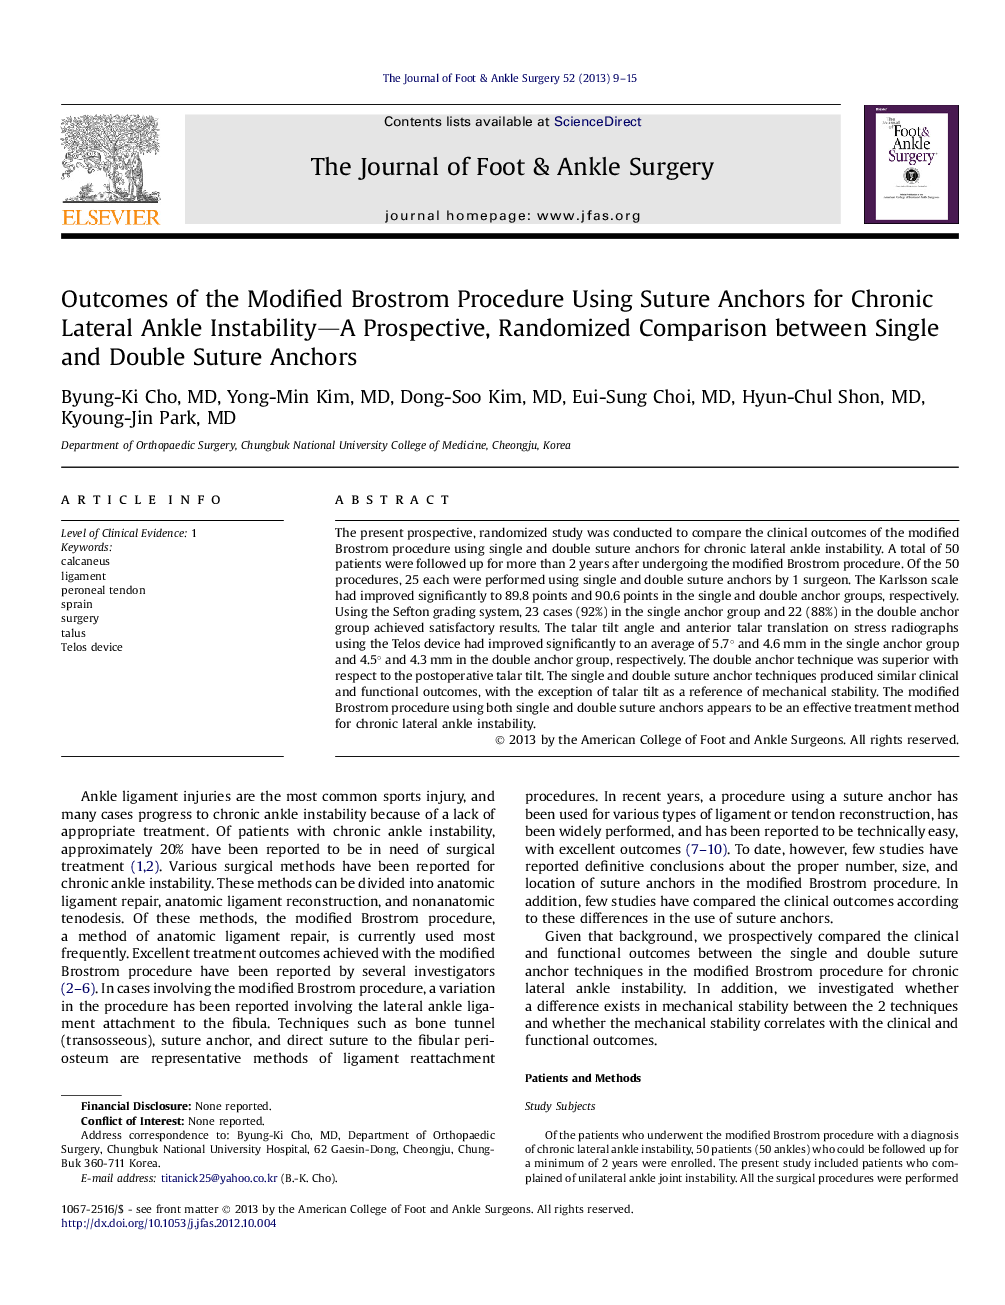 Outcomes of the Modified Brostrom Procedure Using Suture Anchors for Chronic Lateral Ankle Instability—A Prospective, Randomized Comparison between Single and Double Suture Anchors 